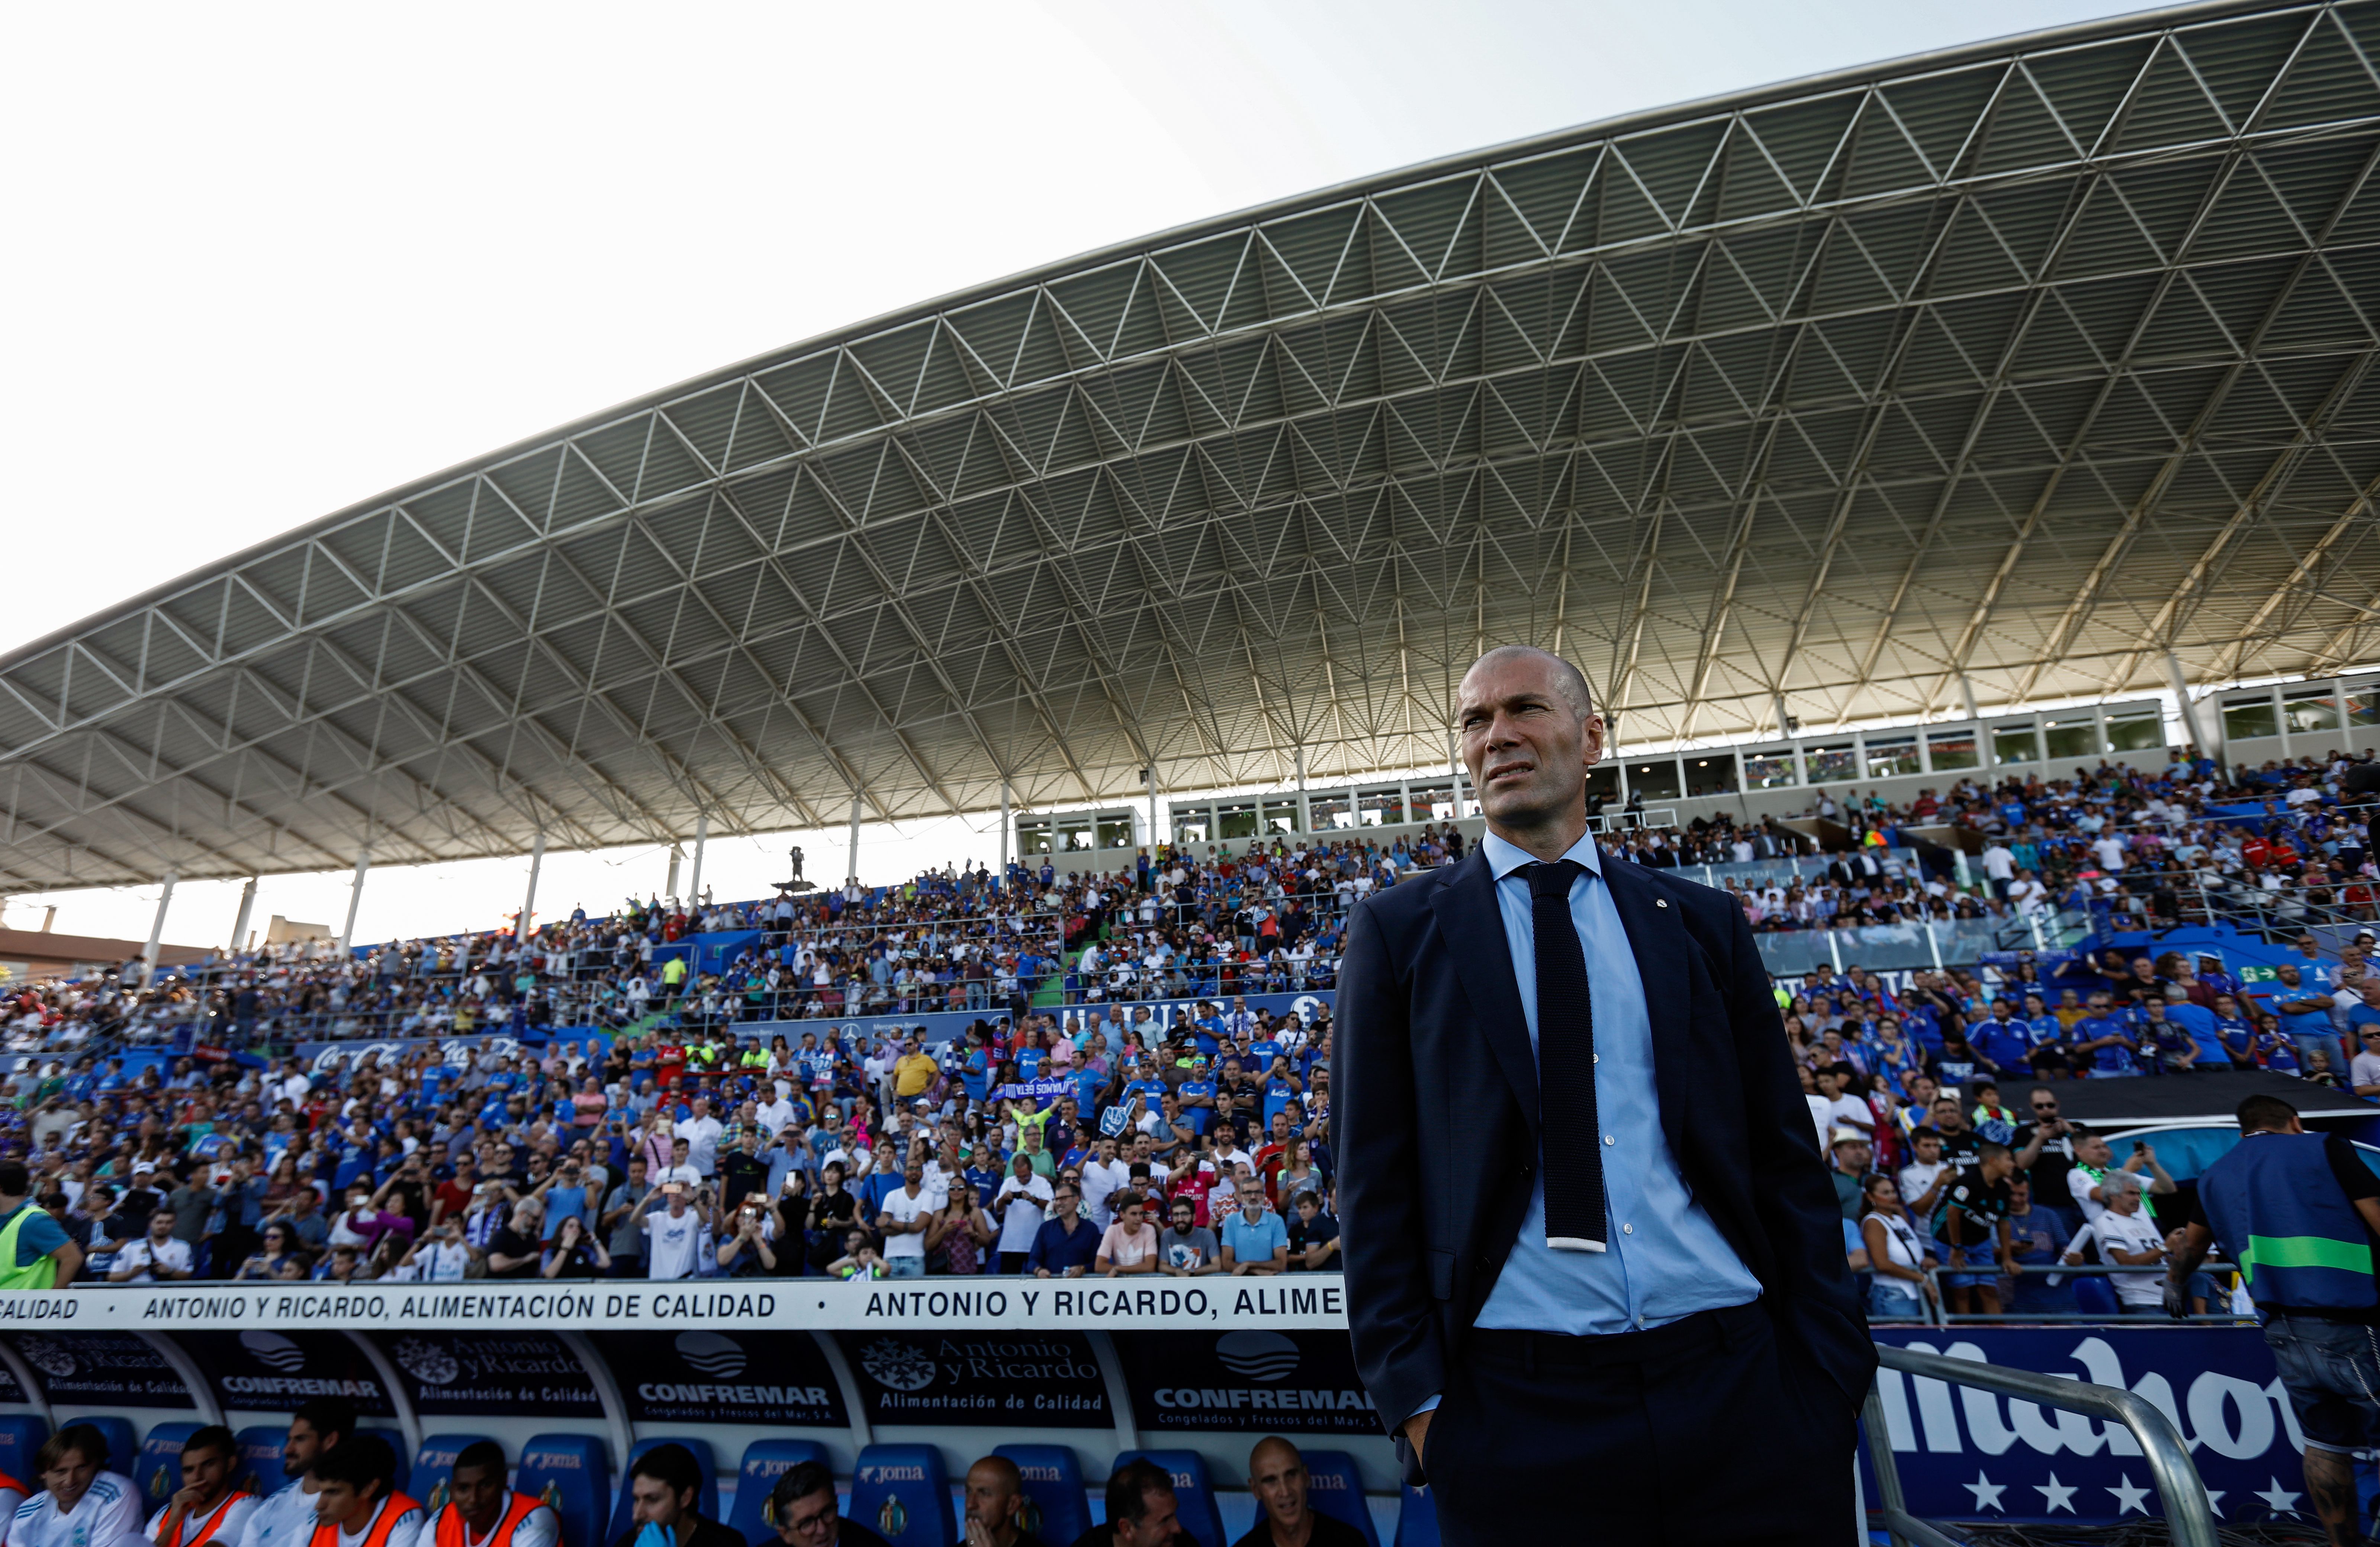 Real Madrid's French coach Zinedine Zidane stands on the sideline during the Spanish league football match Getafe CF vs Real Madrid CF at the Col. Alfonso Perez stadium in Getafe on October 14, 2017. / AFP PHOTO / OSCAR DEL POZO        (Photo credit should read OSCAR DEL POZO/AFP/Getty Images)